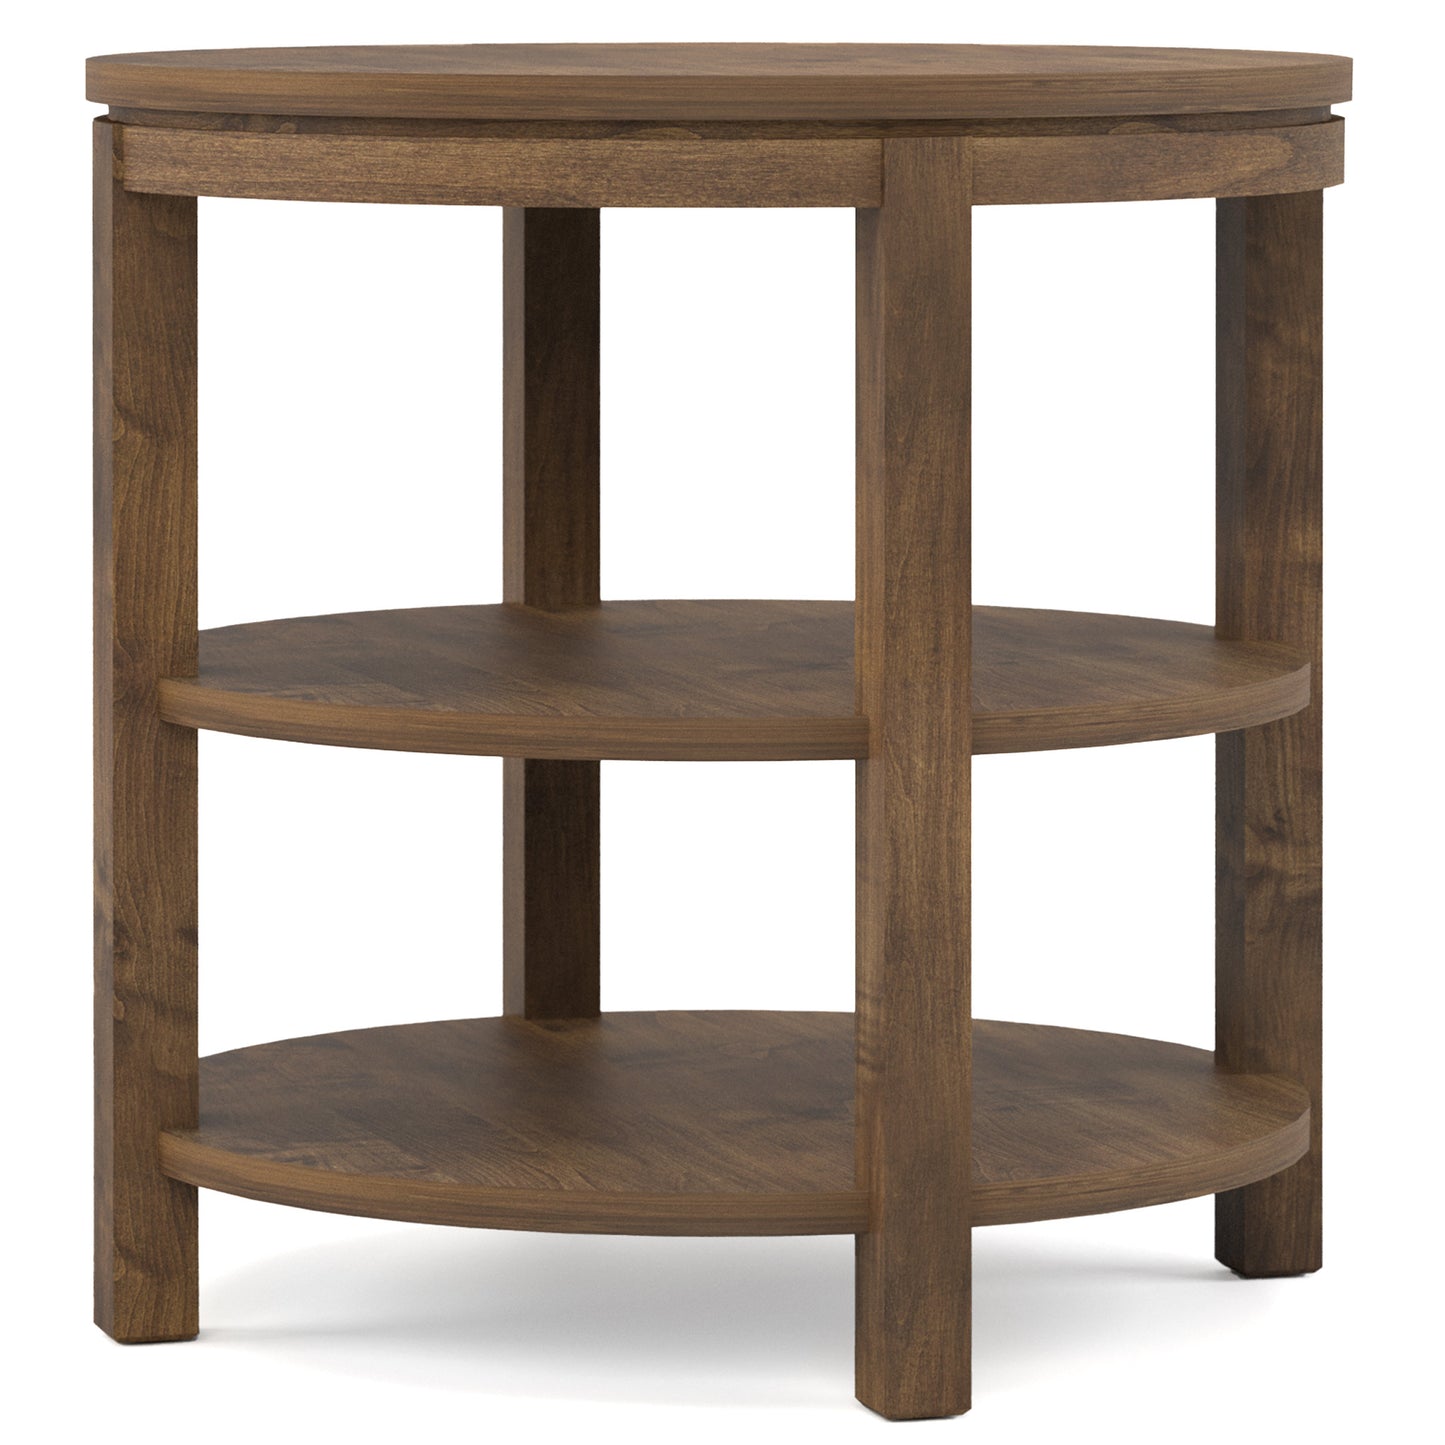 Dwyer Round End Table